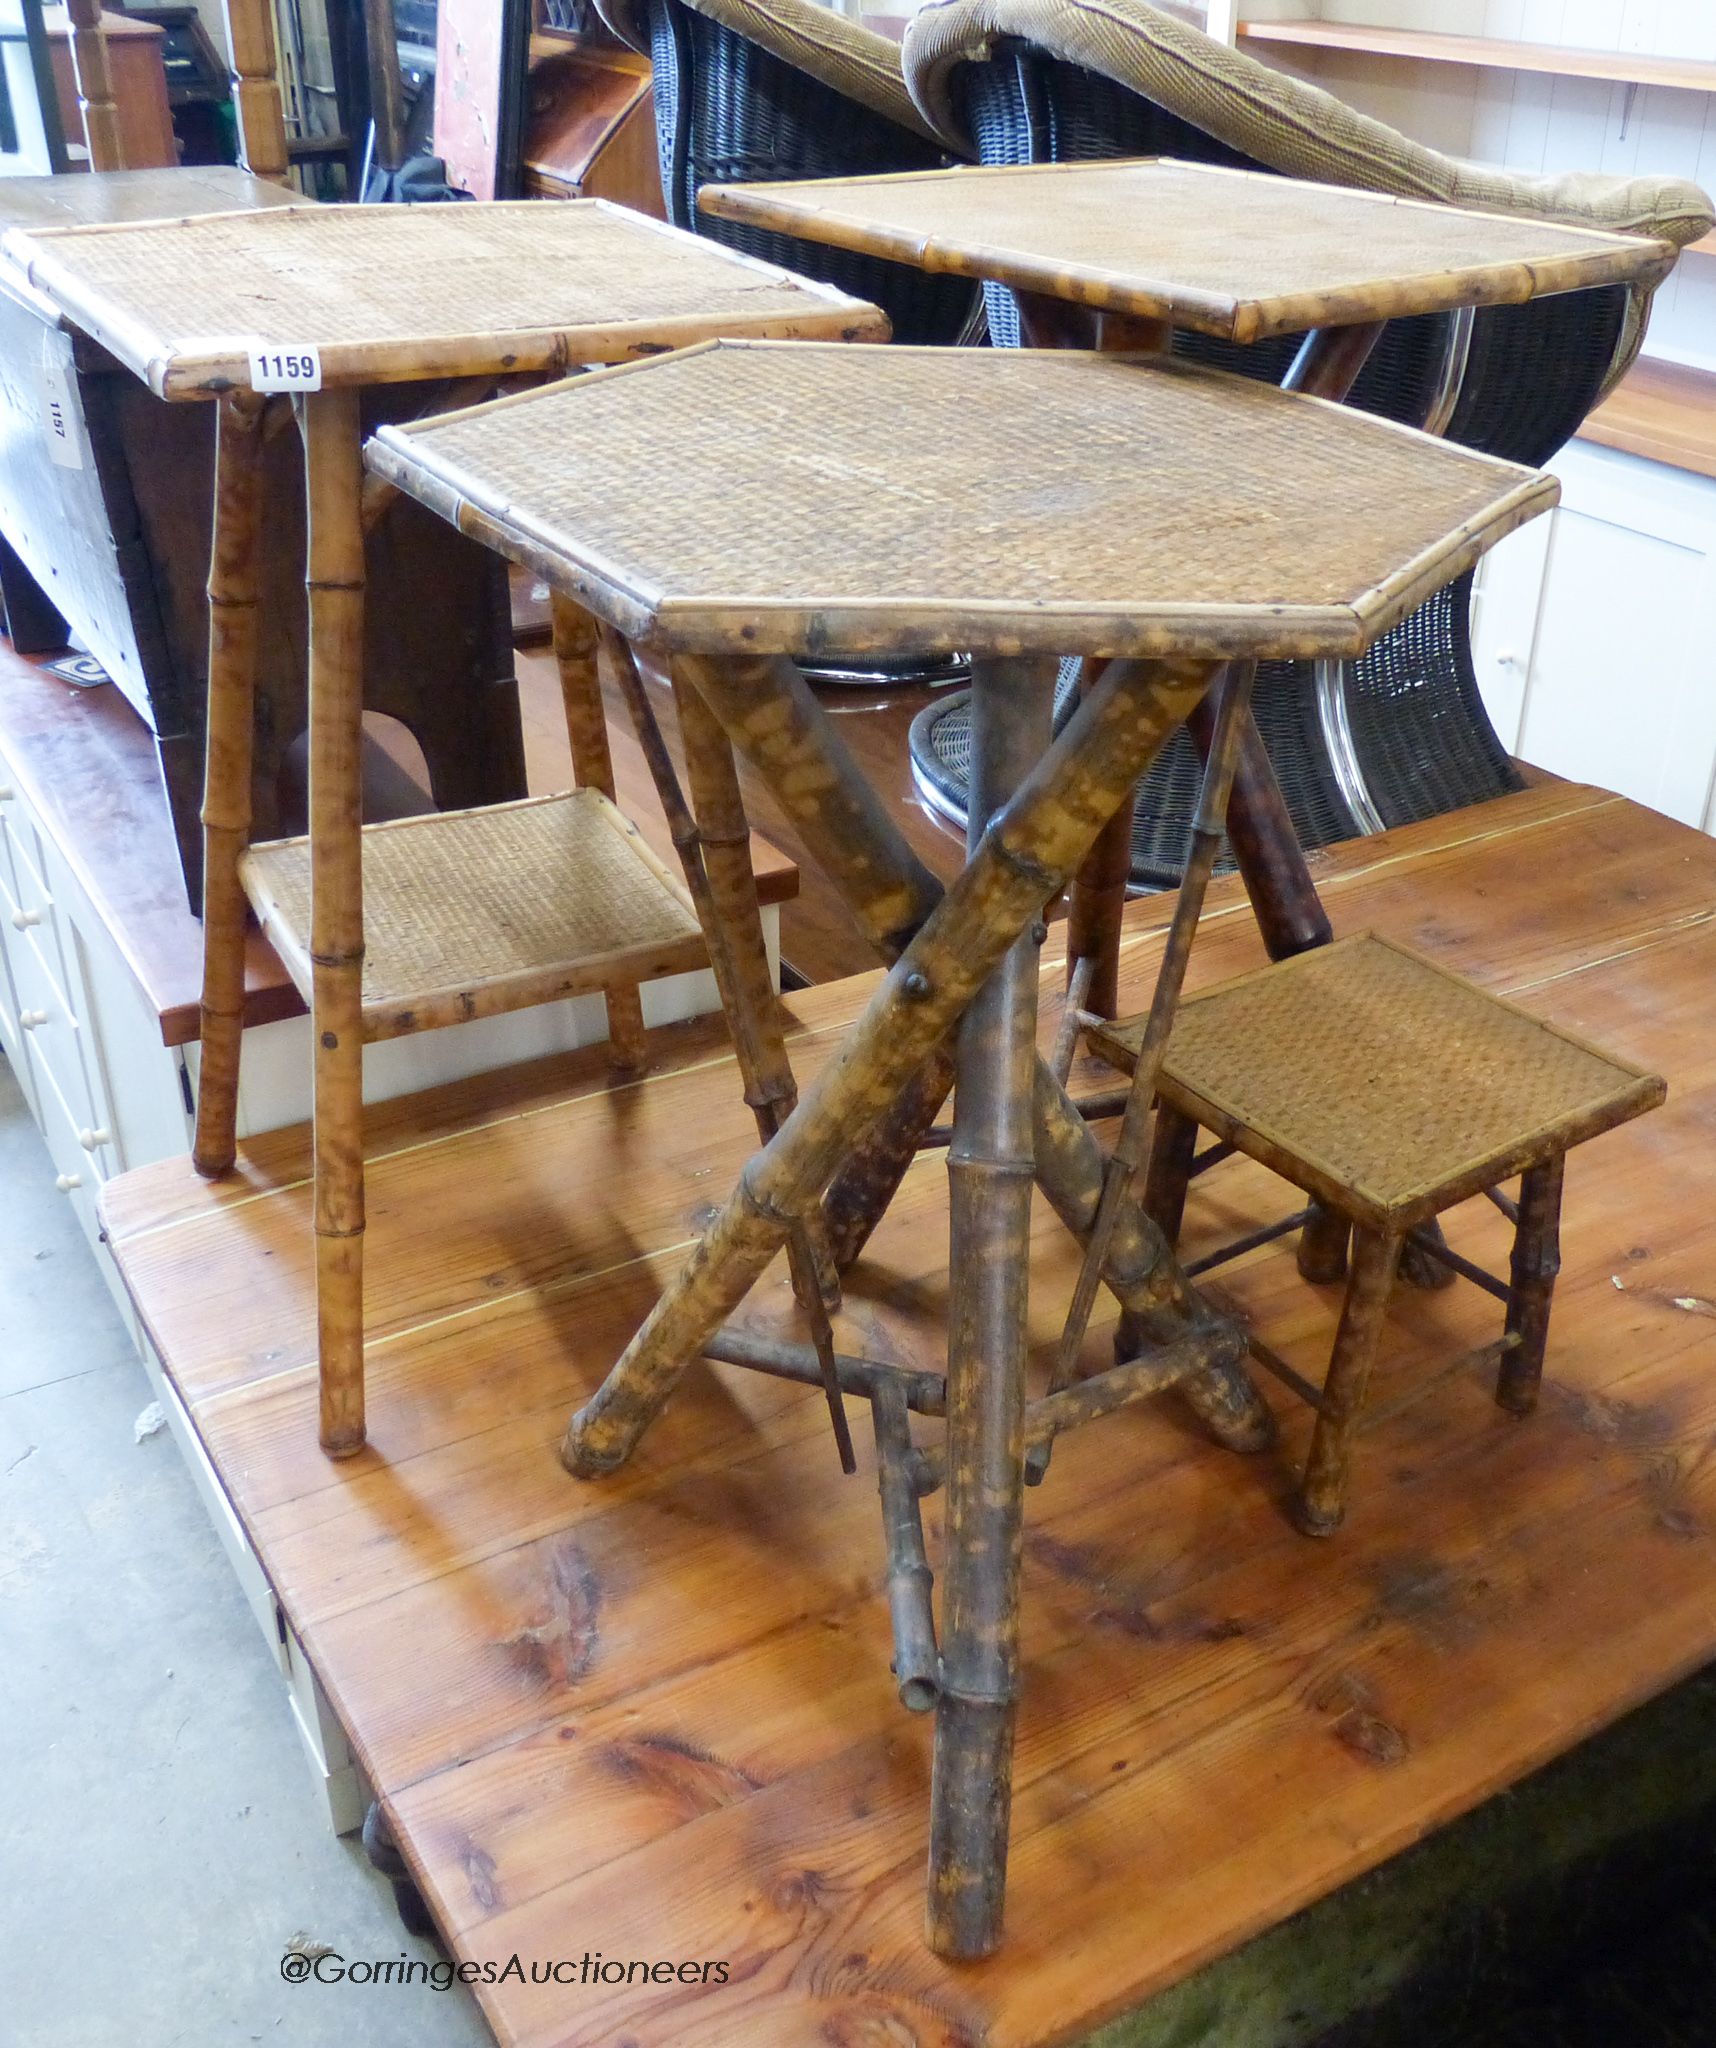 Three wicker and bamboo tables and stool.